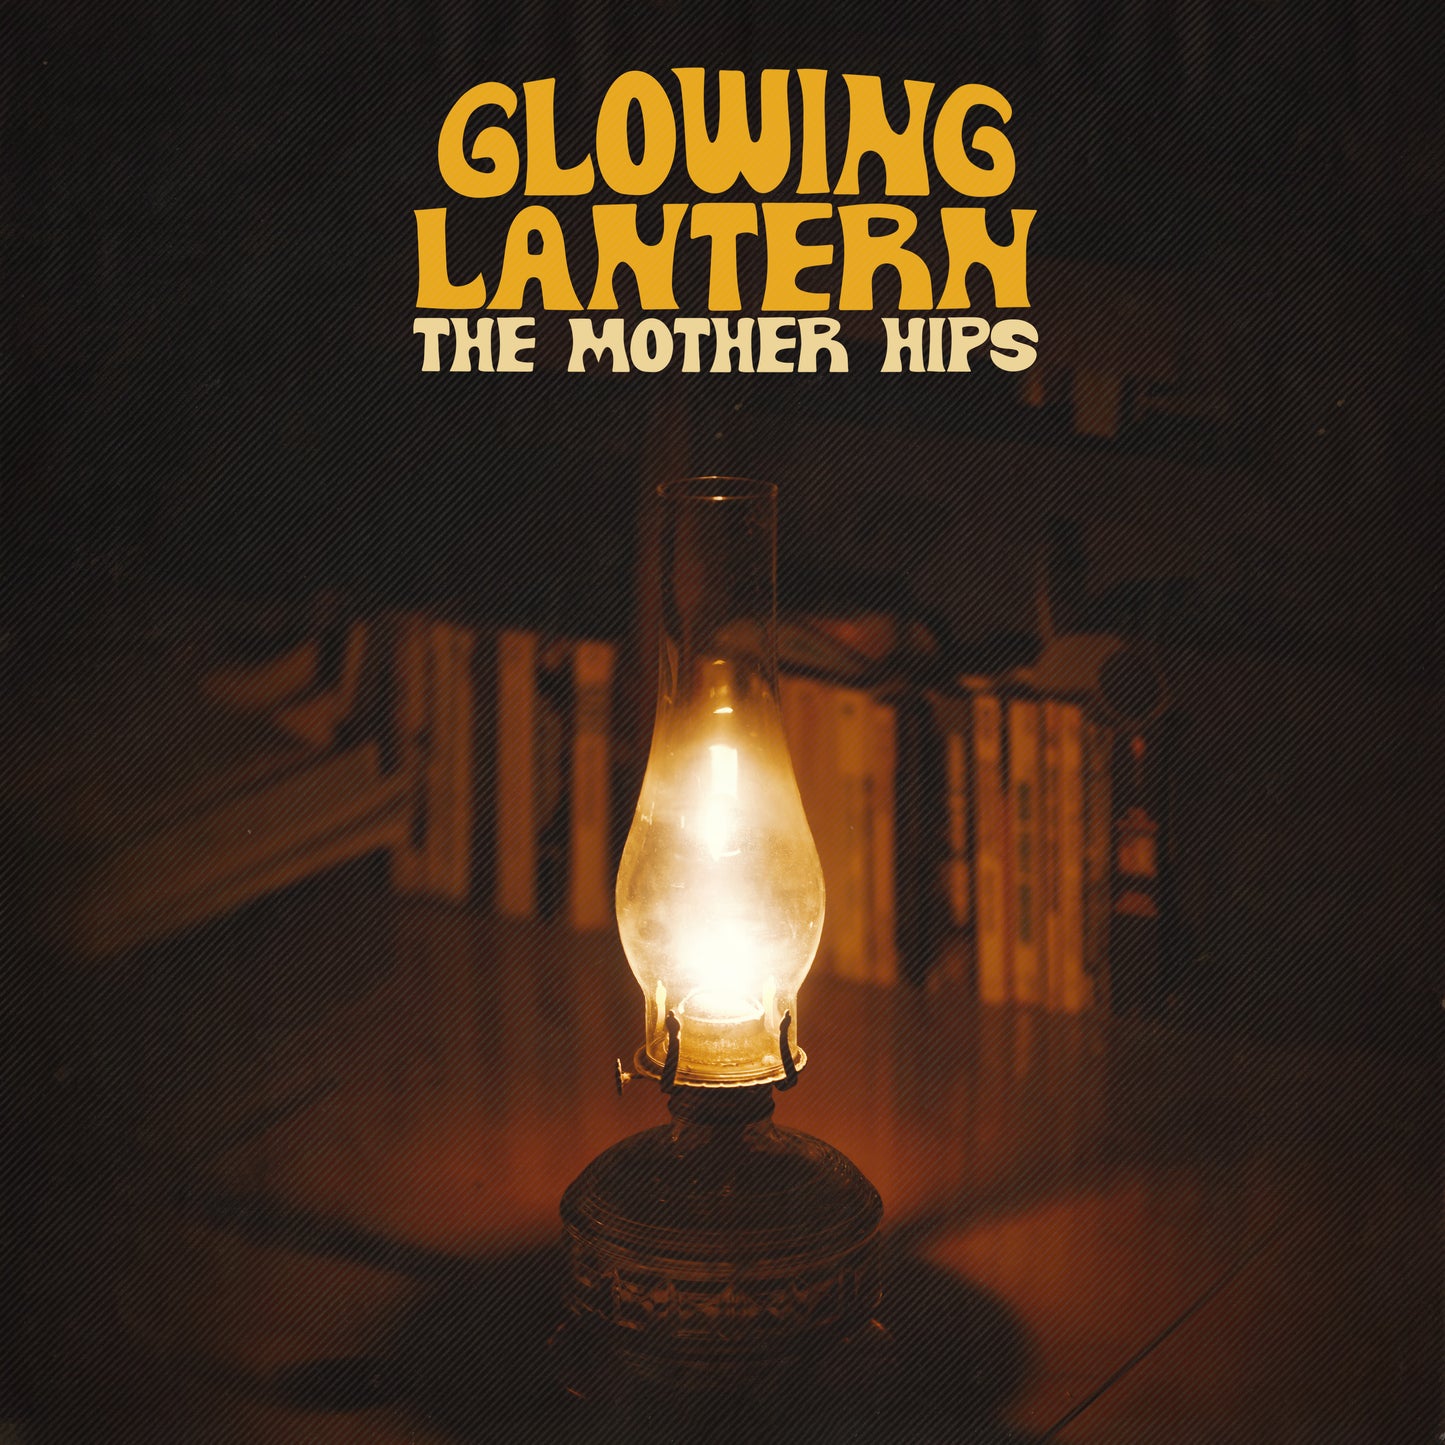 The Mother Hips - "Glowing Lantern" Vinyl - Limited Edition GOLD